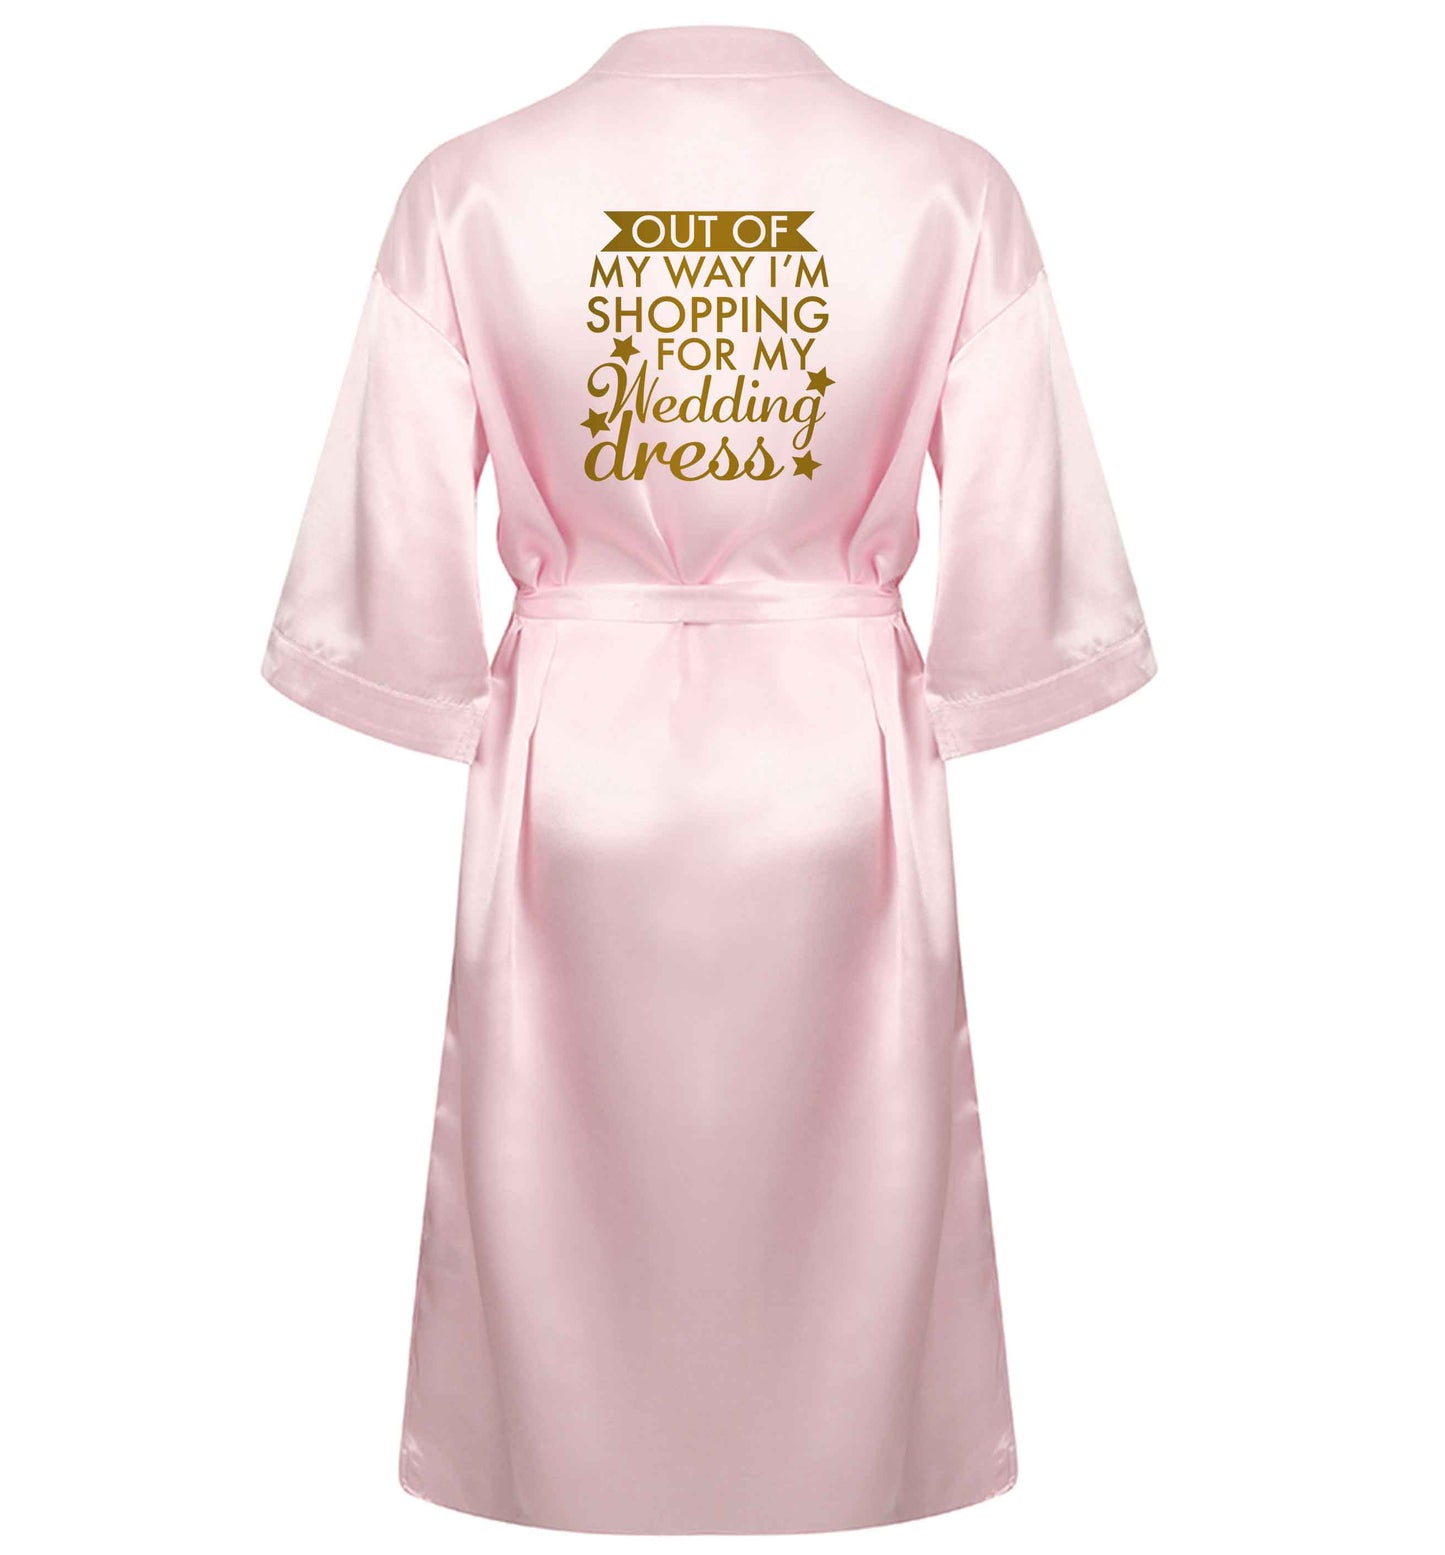 Out of my way I'm shopping for my wedding dress XL/XXL pink  ladies dressing gown size 16/18